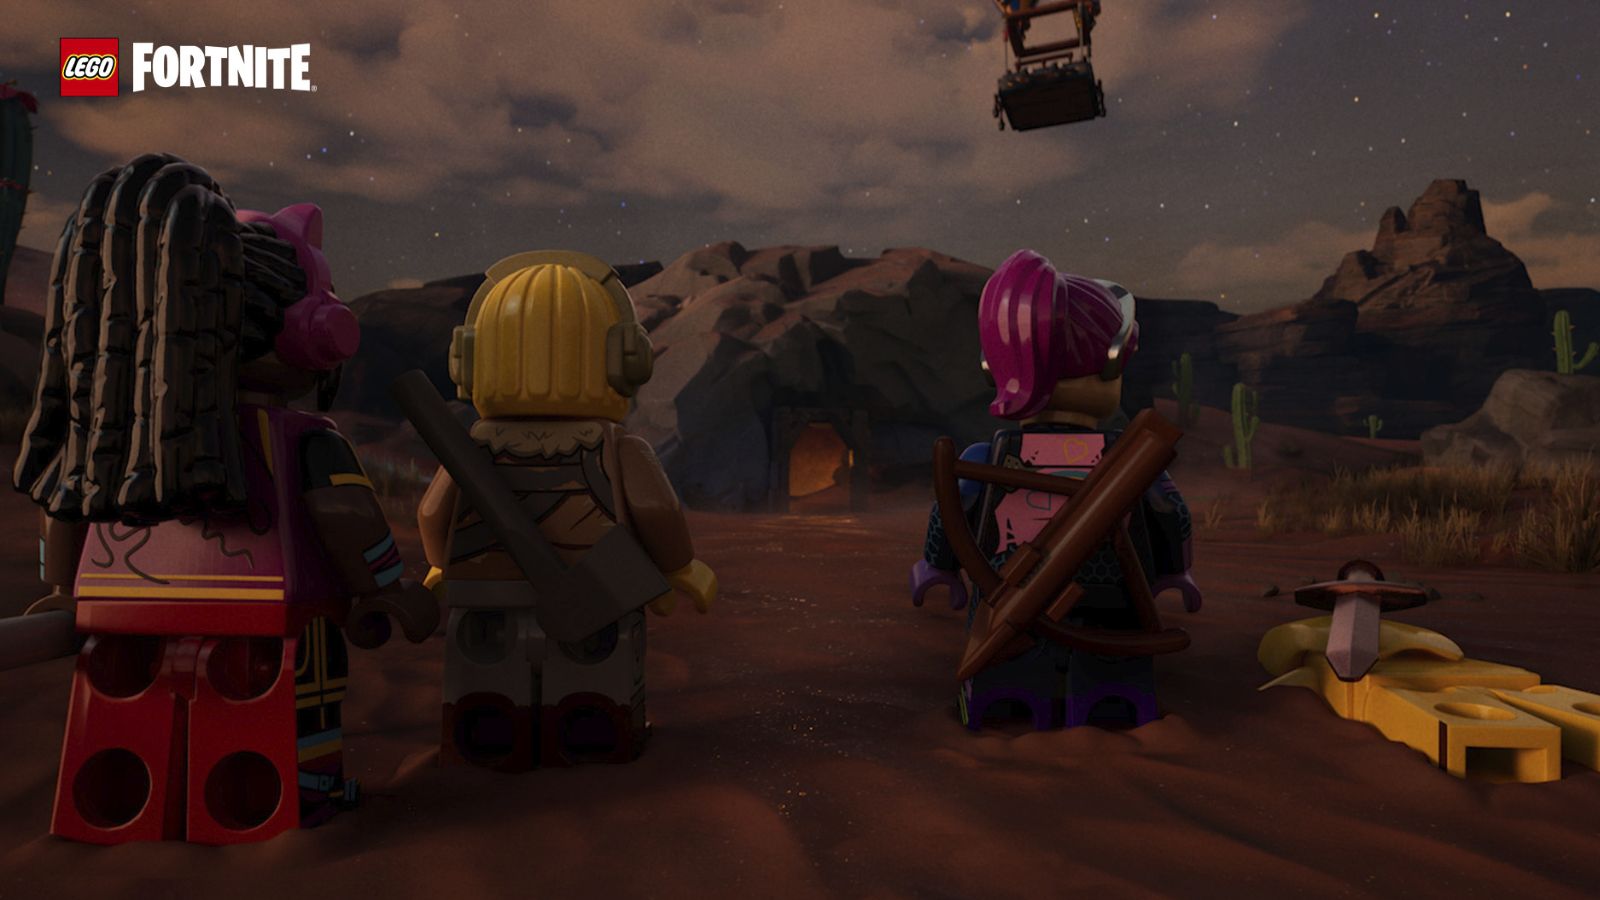 Lego Fortnite launches with more players than every Fortnite battle royale  mode combined